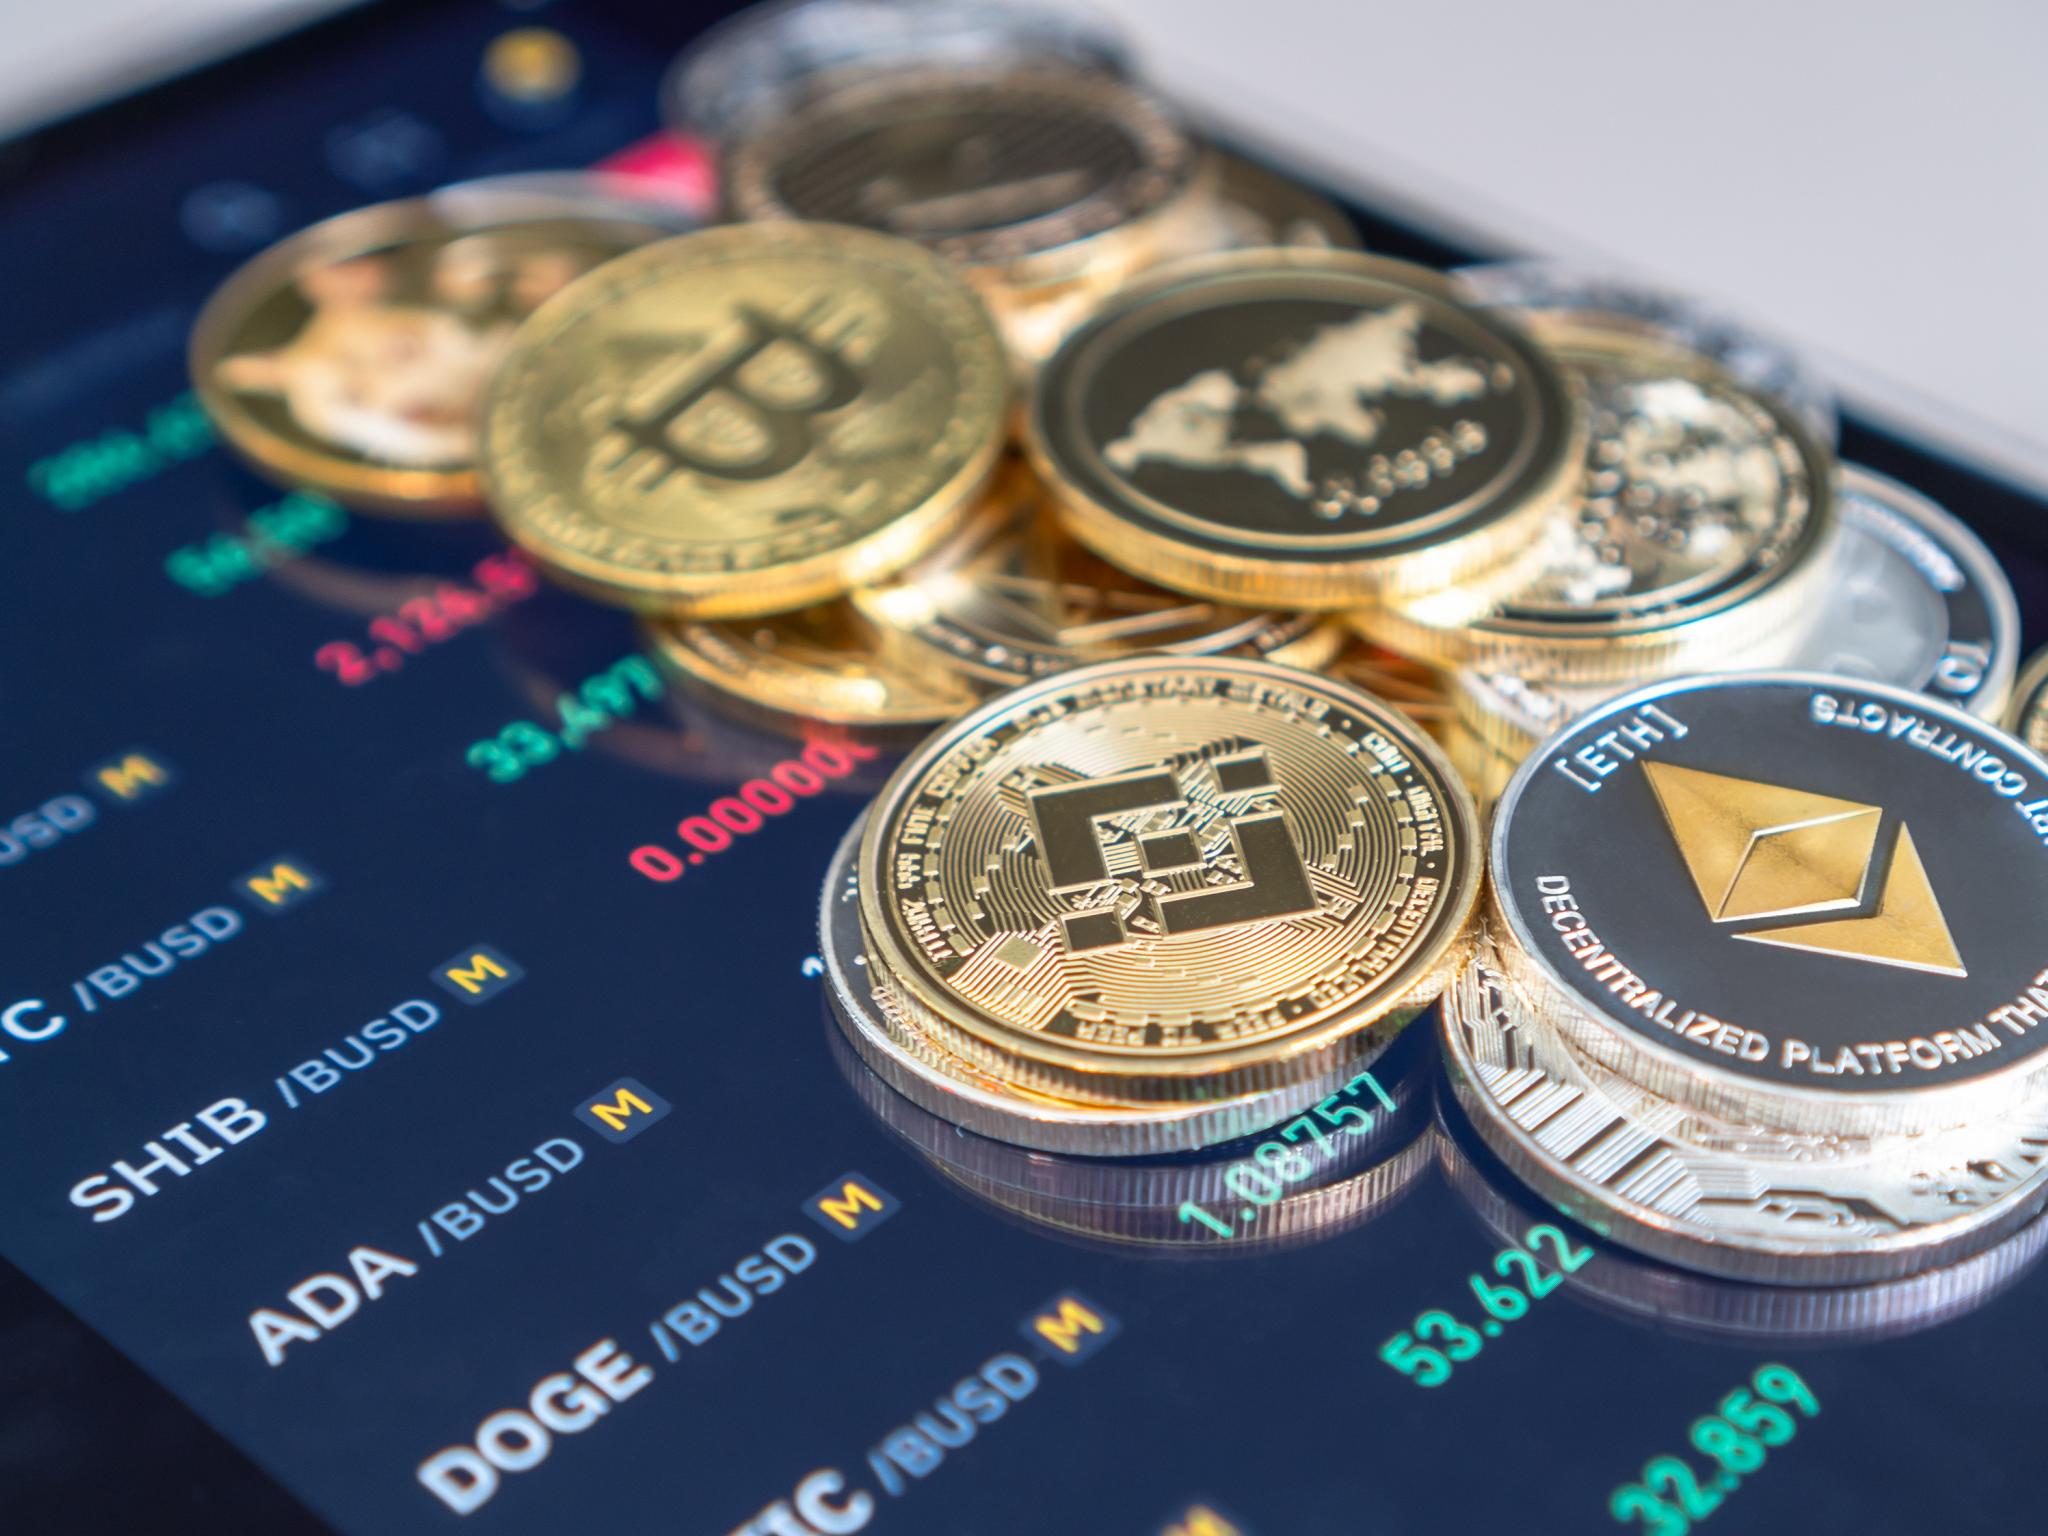  crypto-analyst-foresees-altcoin-boom-amid-economic-downturn-altcoin-bull-market-has-started 